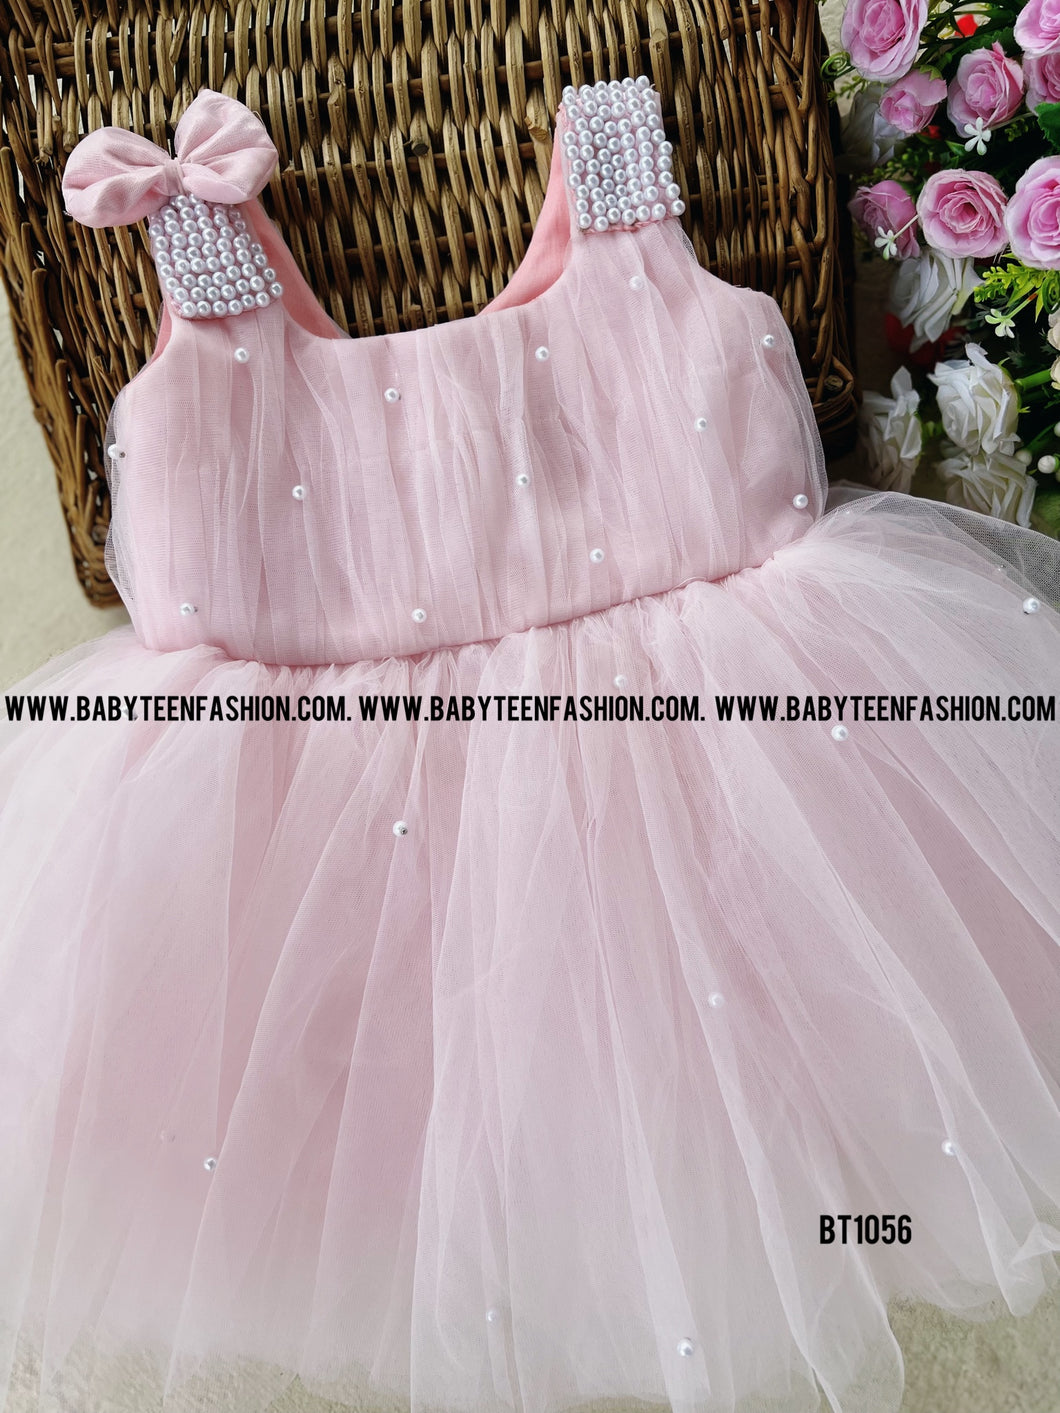 BT1056 Baby Pink Party Wear Pearl Frock with Bow Highlight for Girls